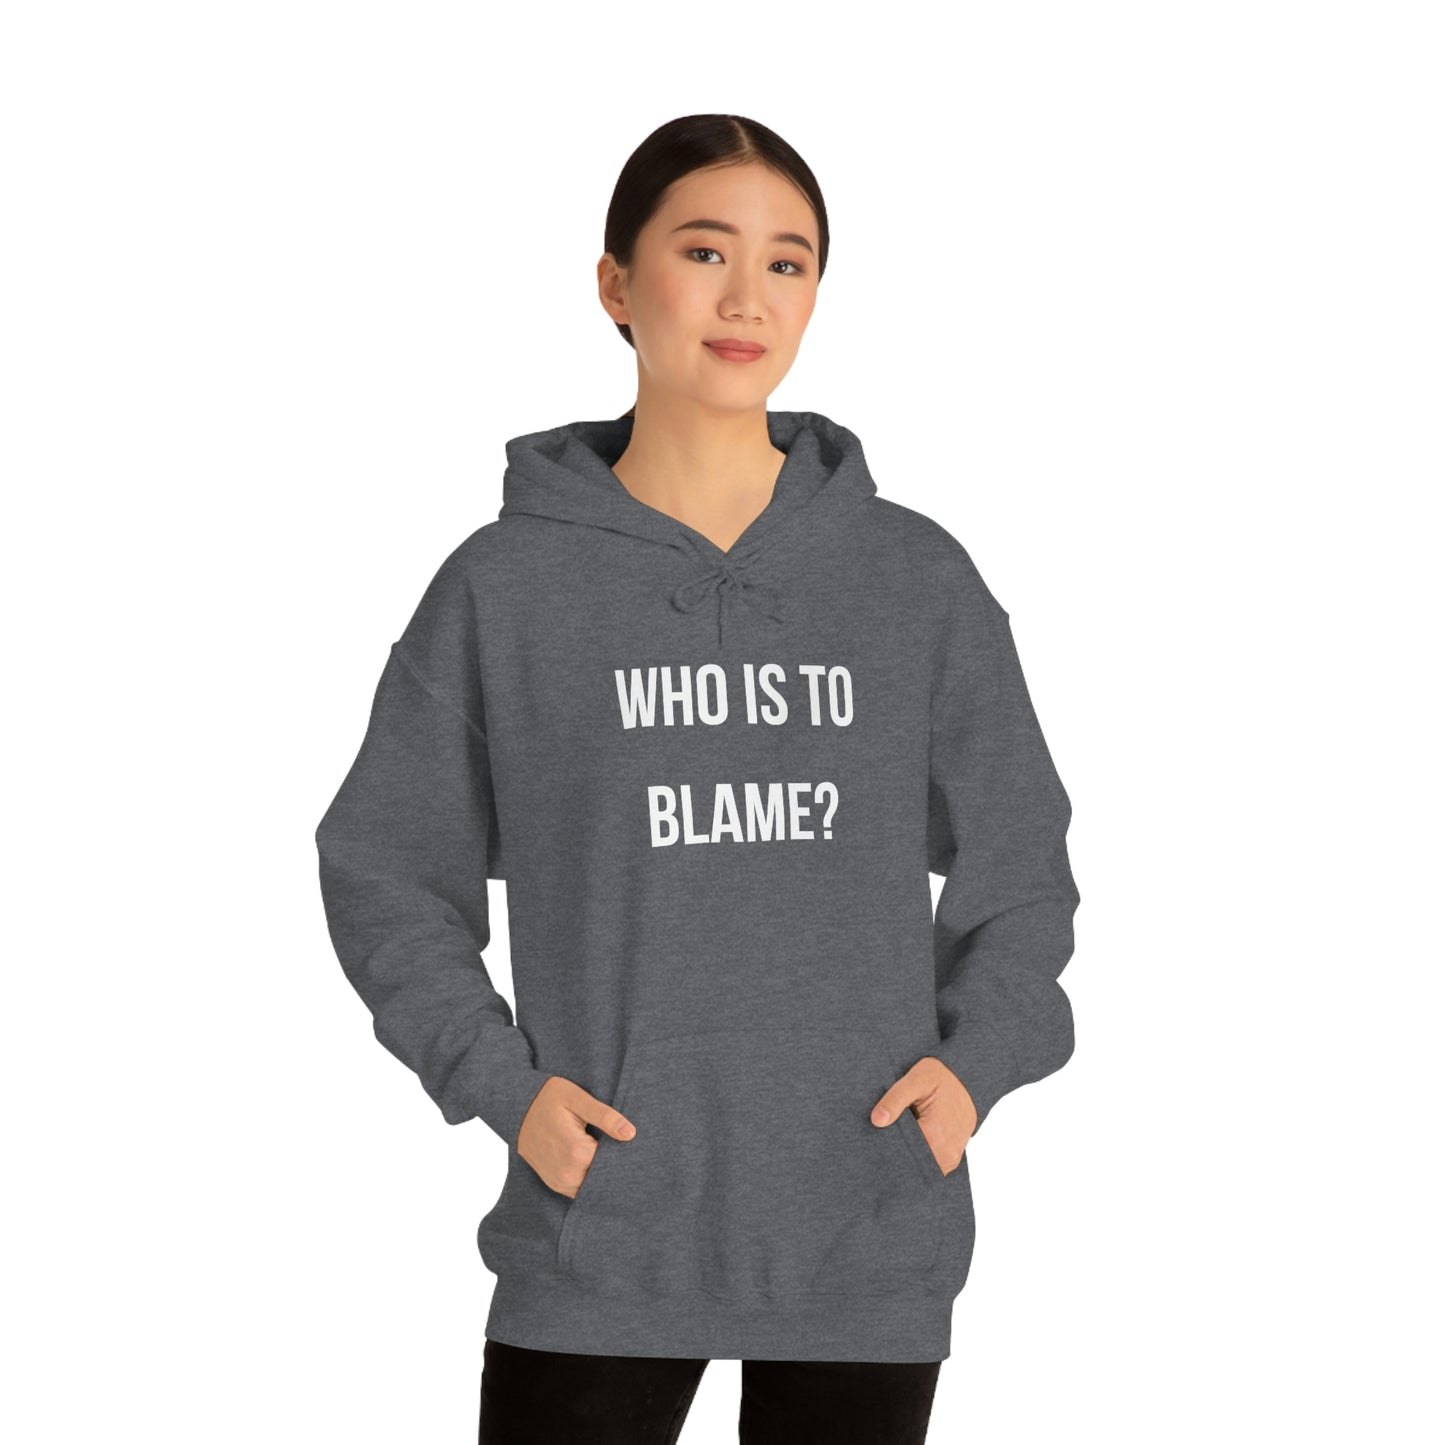 WHO IS TO BLAME? Unisex Hoodie